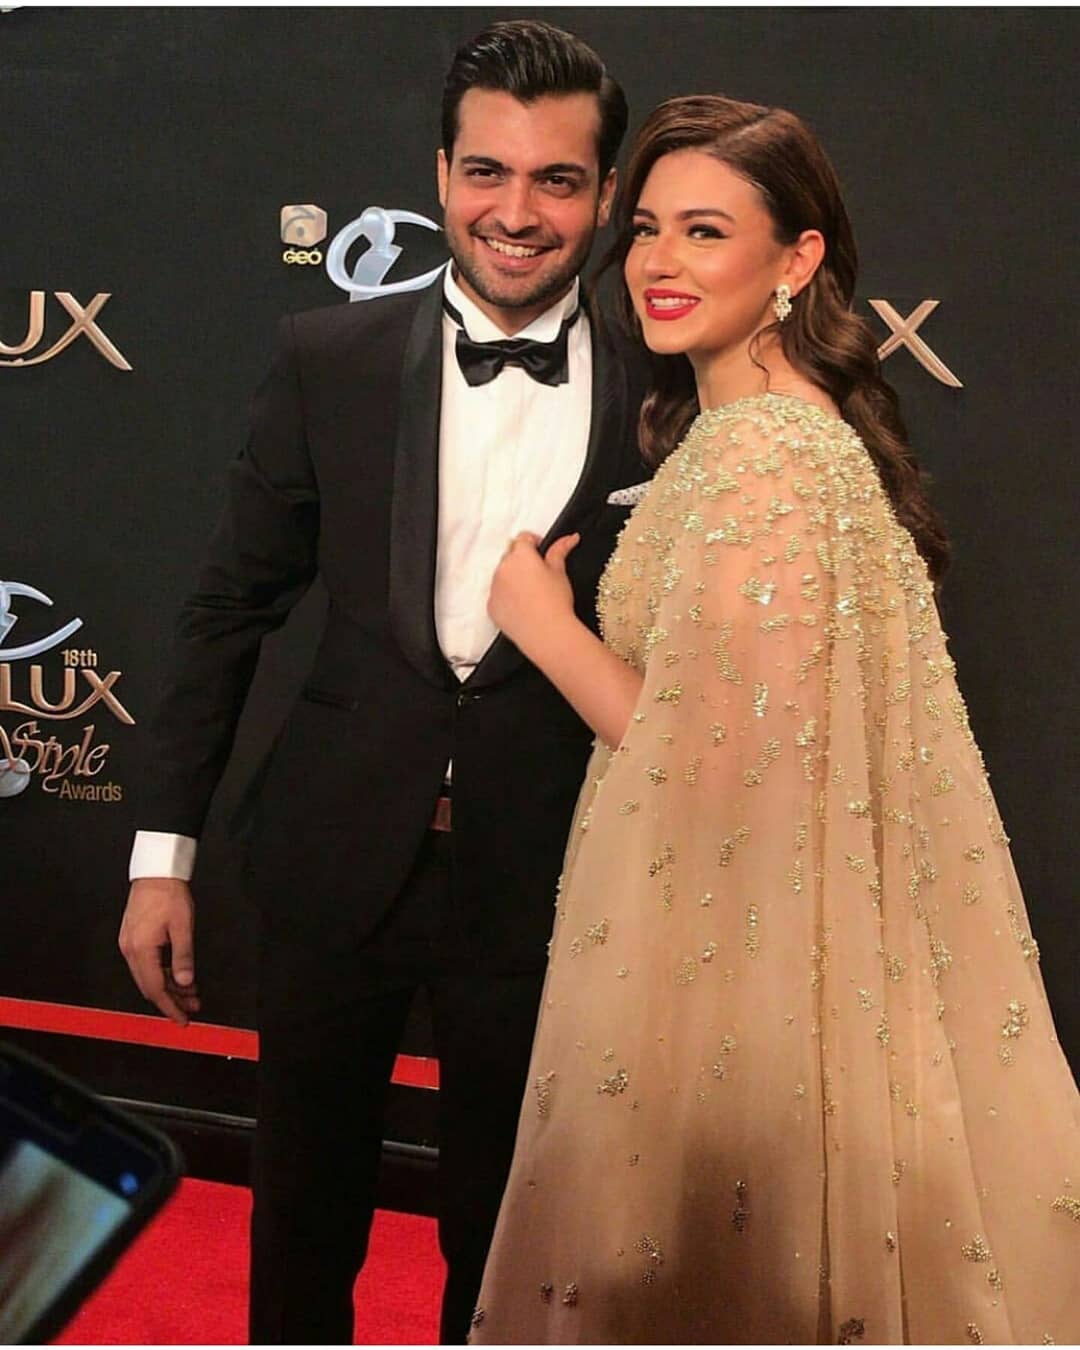 Famous Couple Zara Noor Abbas and Asad Siddique at Lux Style Awards